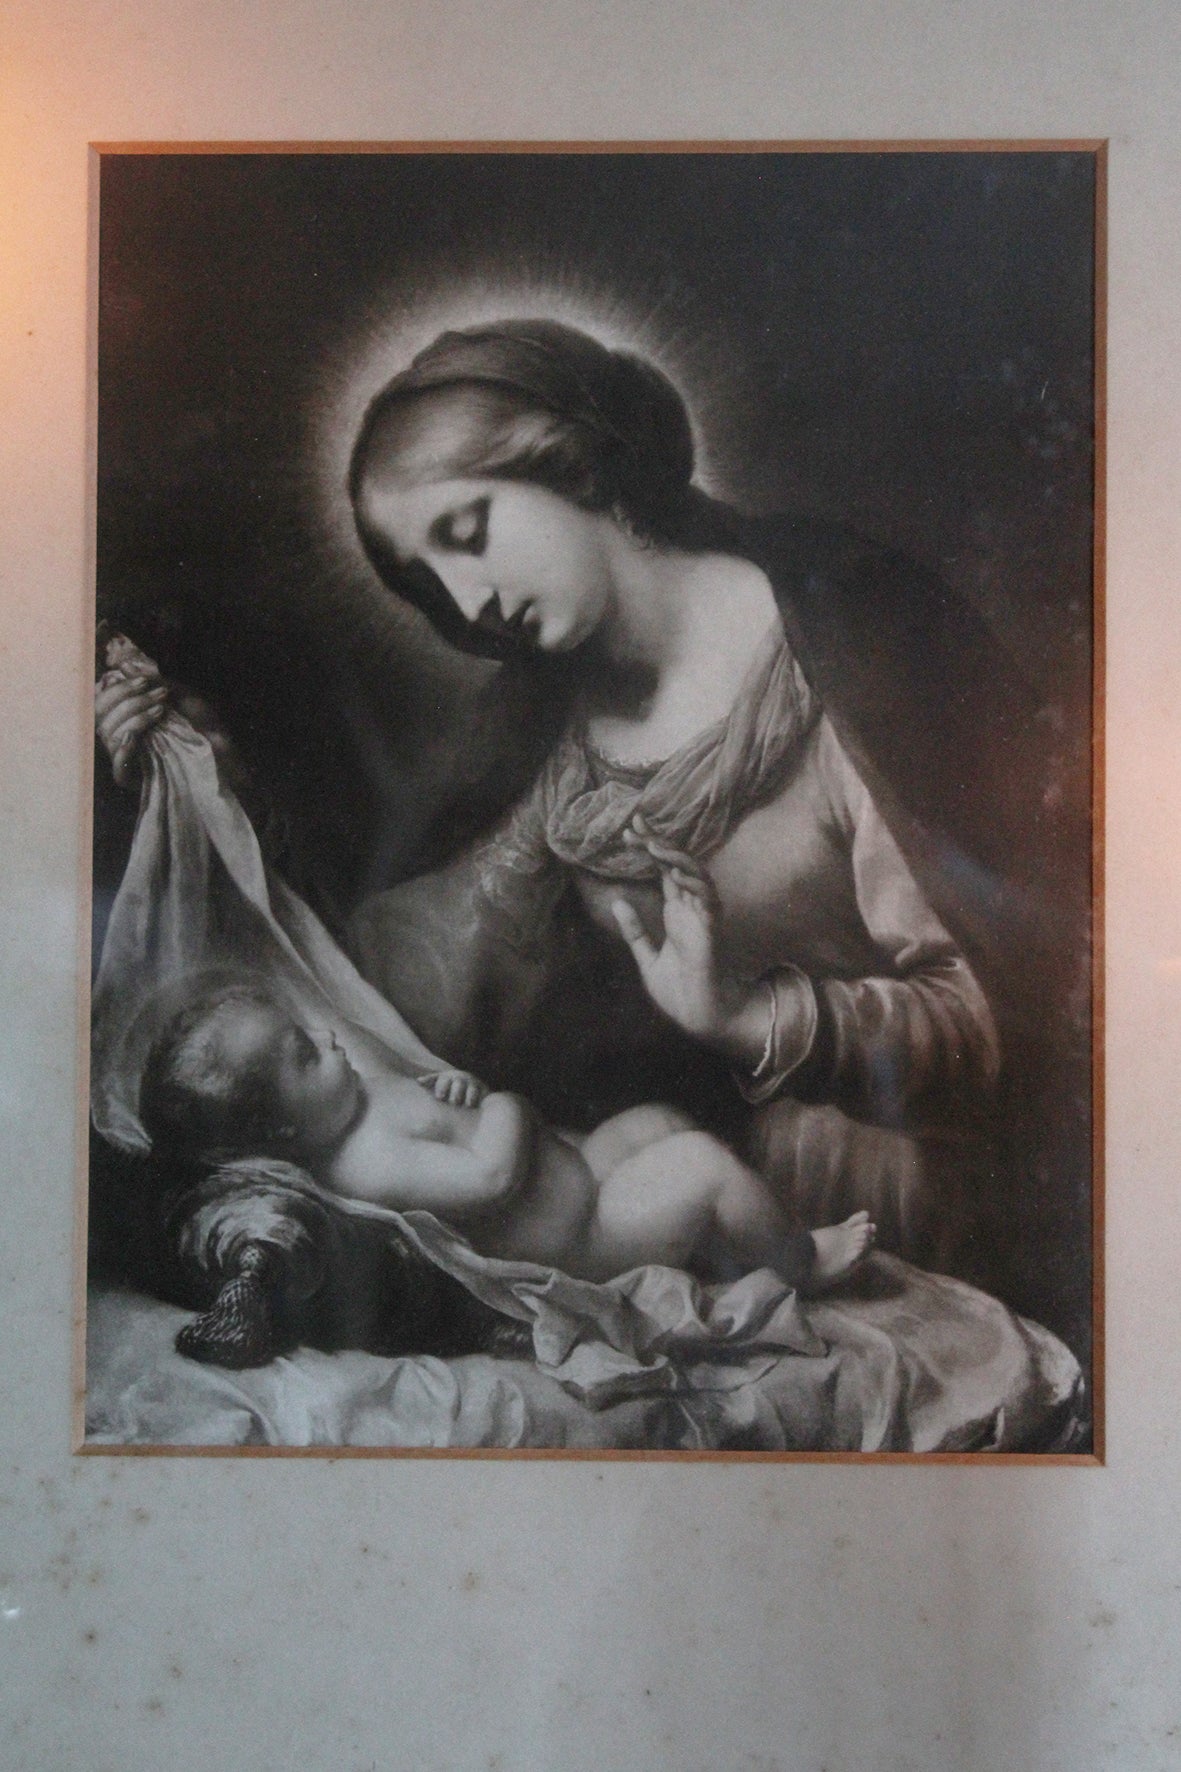 Beautiful Antique Frame and Print - "Madonna & Child"